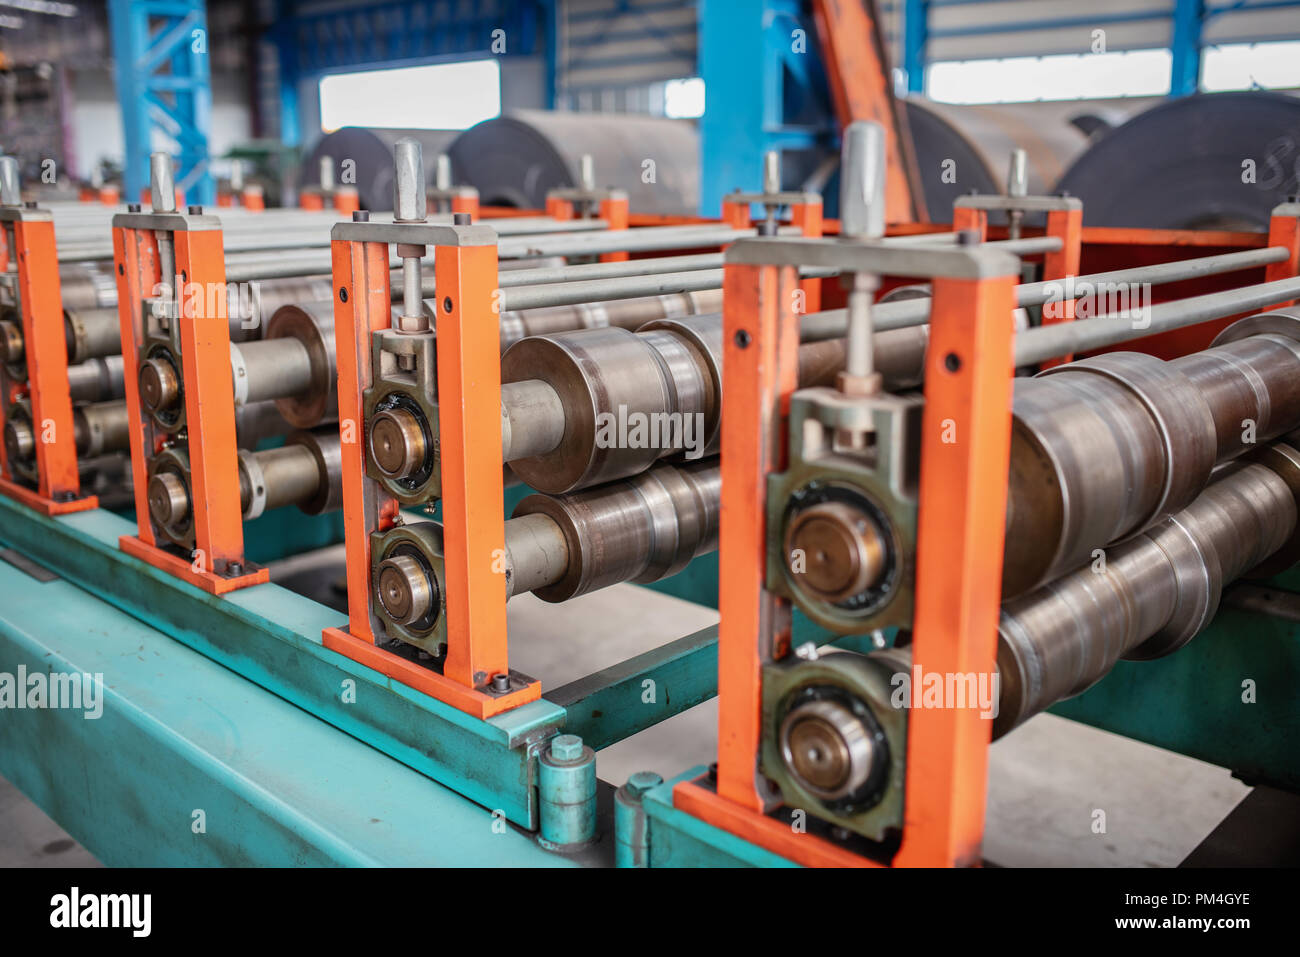 Huge machinery in factory for manufacturing metal works. Stock Photo